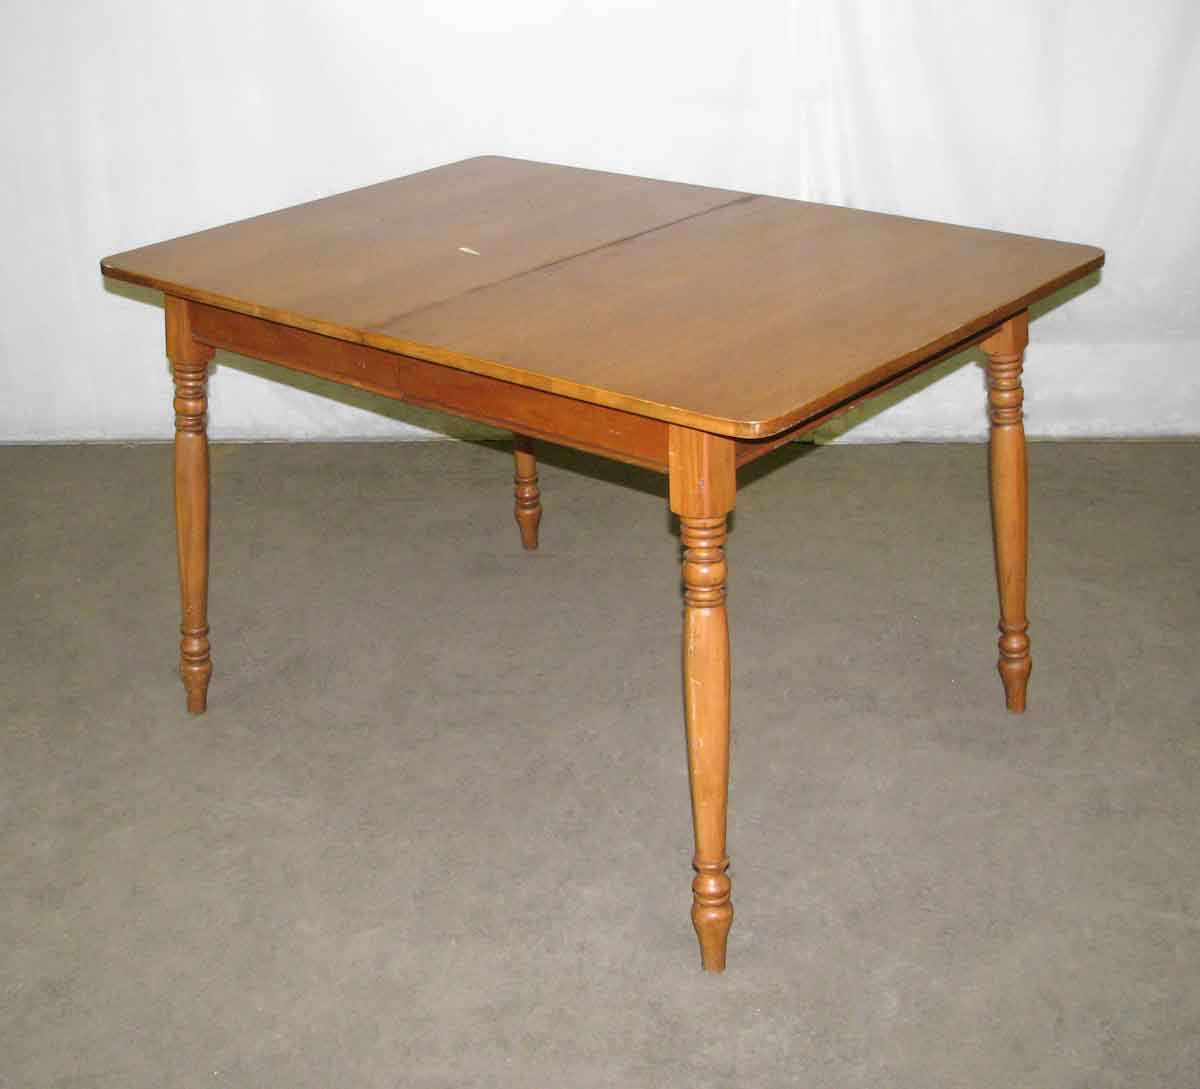 Small Wooden Kitchen Table
 Extendable Small Wooden Dining Table